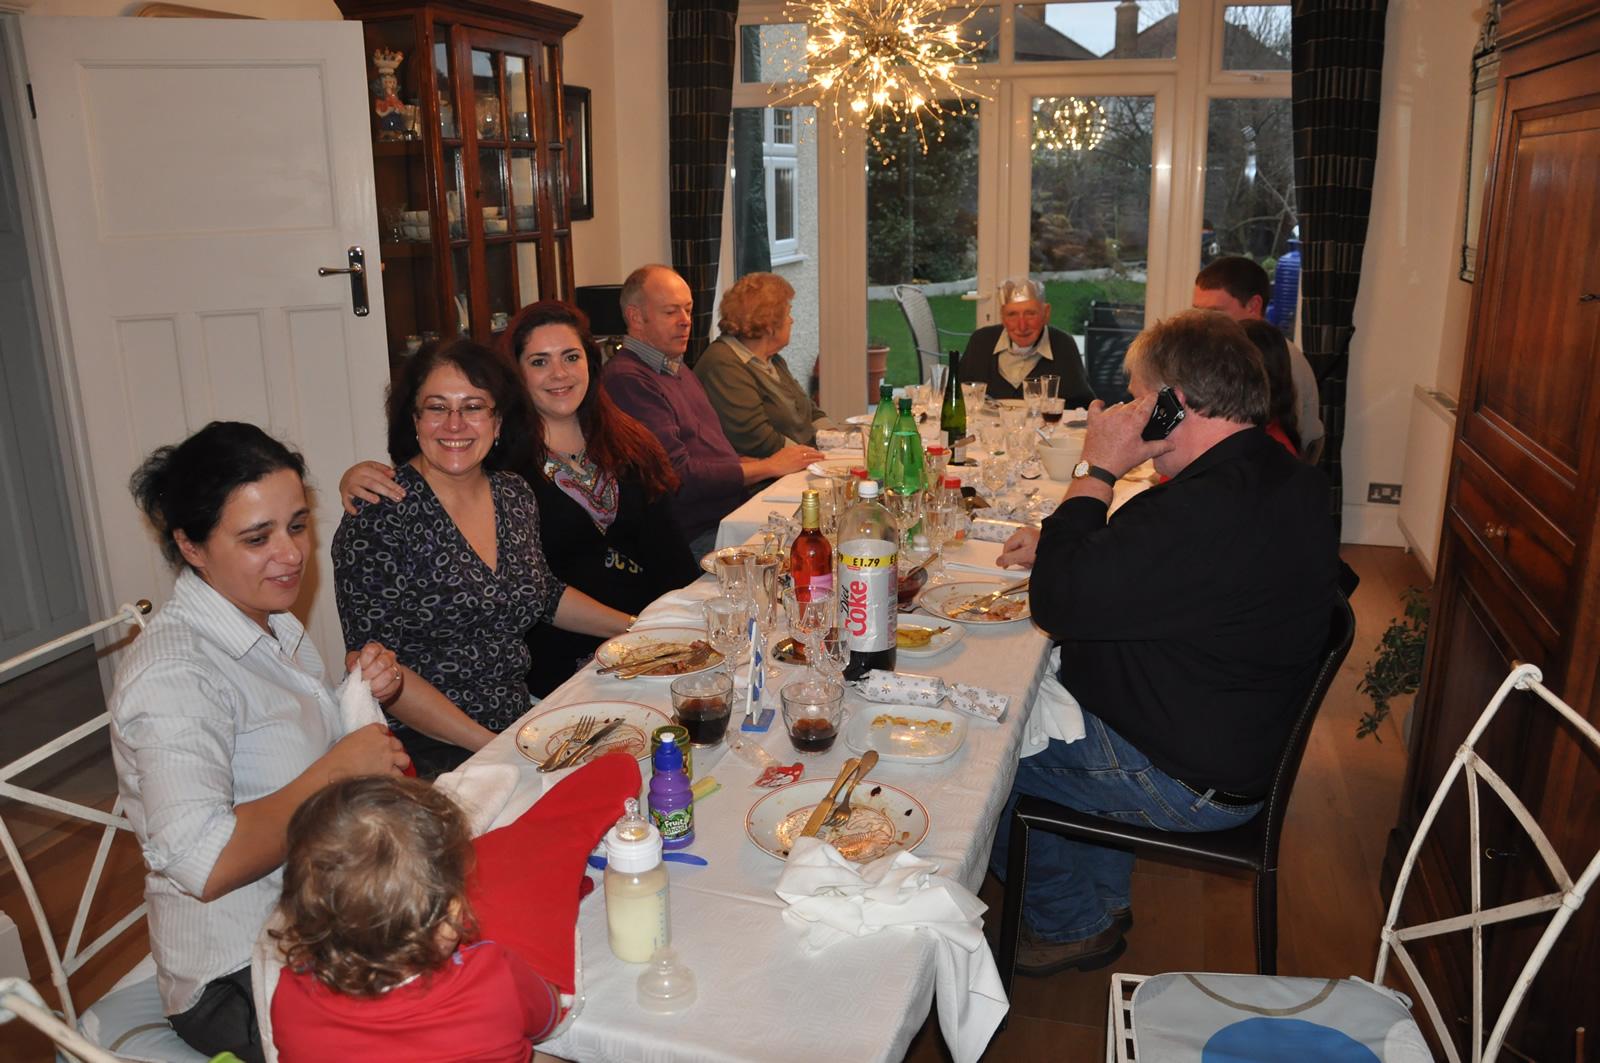 Christmas dinner. Head of the table of course!